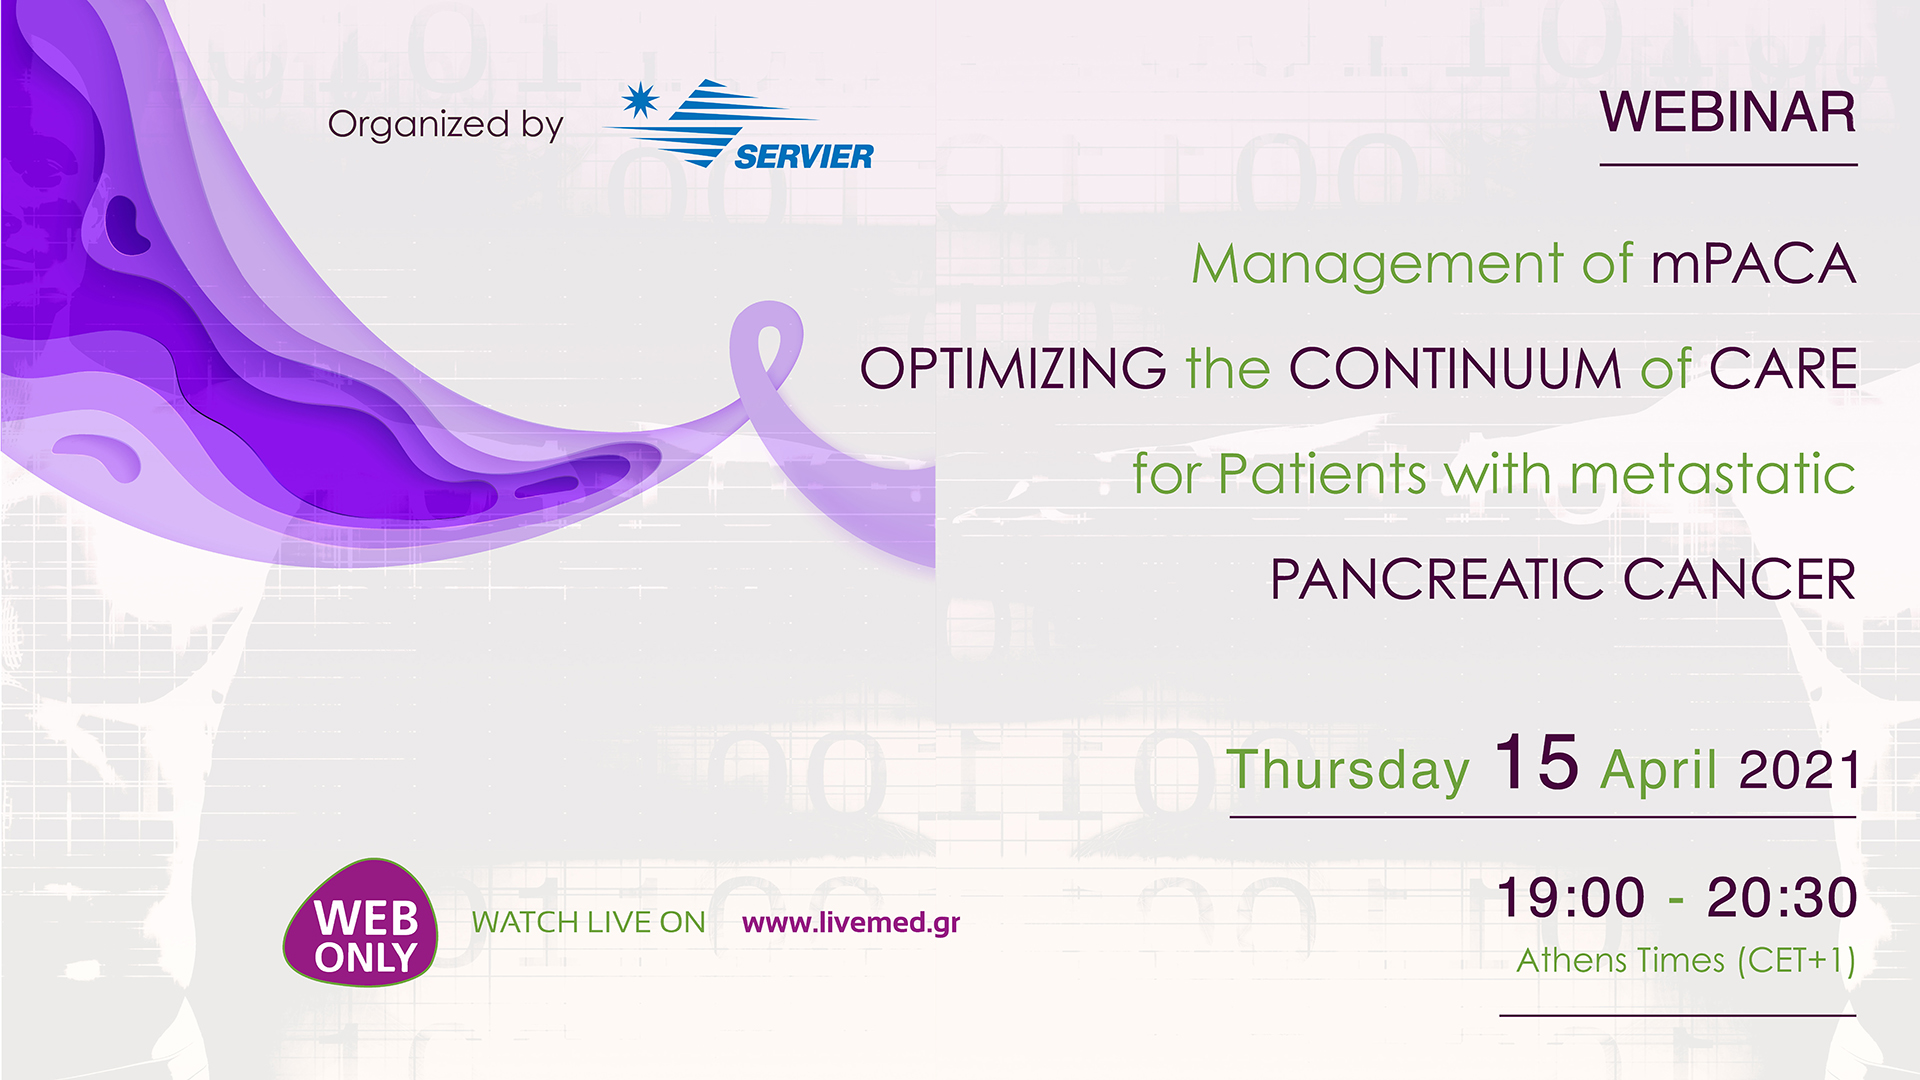 Webinar - Management of mPACA - Optimizing the Continuum of Care for Patients with metastatic Pancreatic Cancer